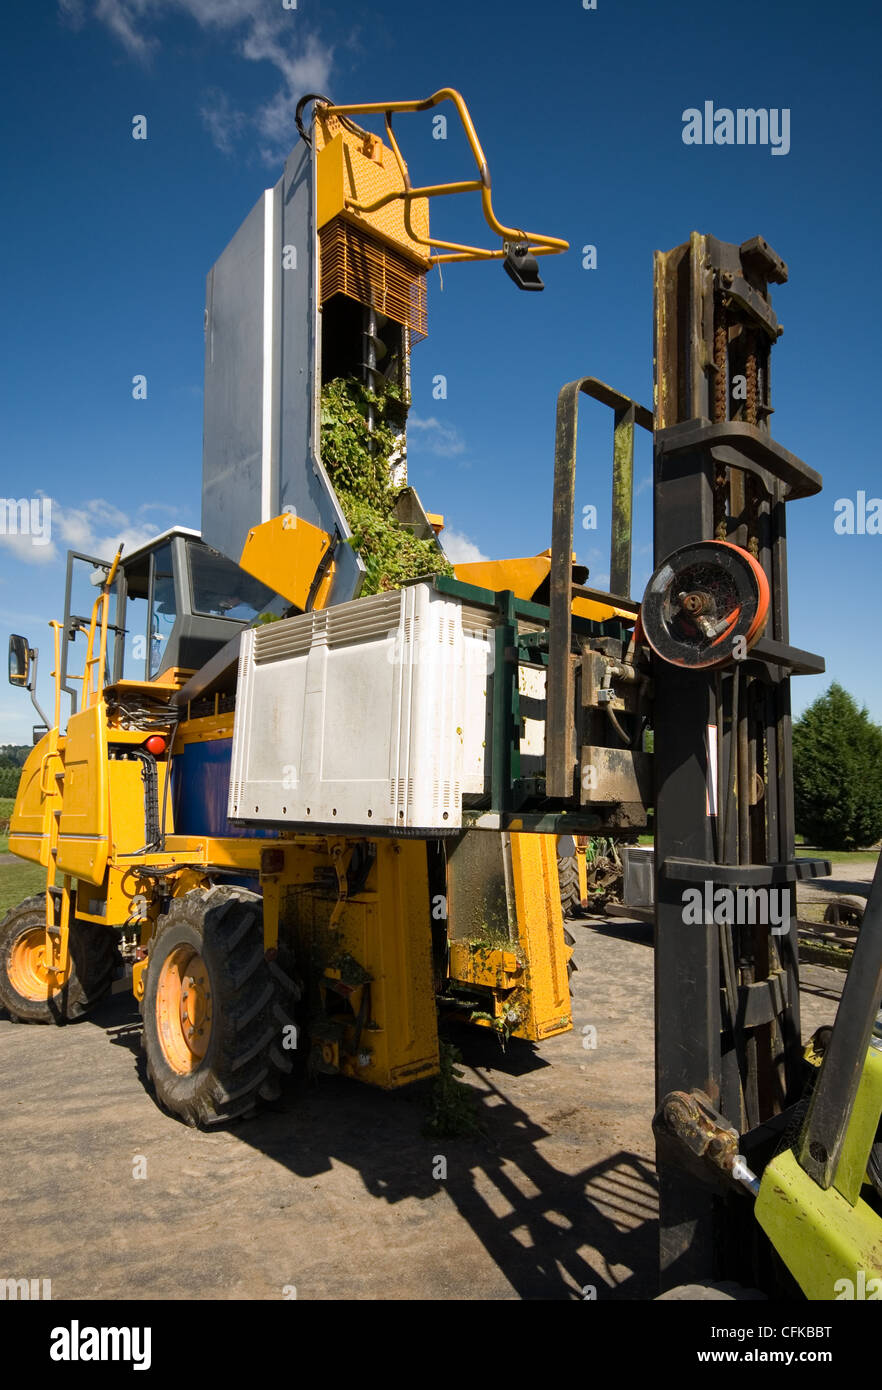 A grape harvester dumps its load of freshly picked grapes into a plastic bin supported by a forklift Stock Photo